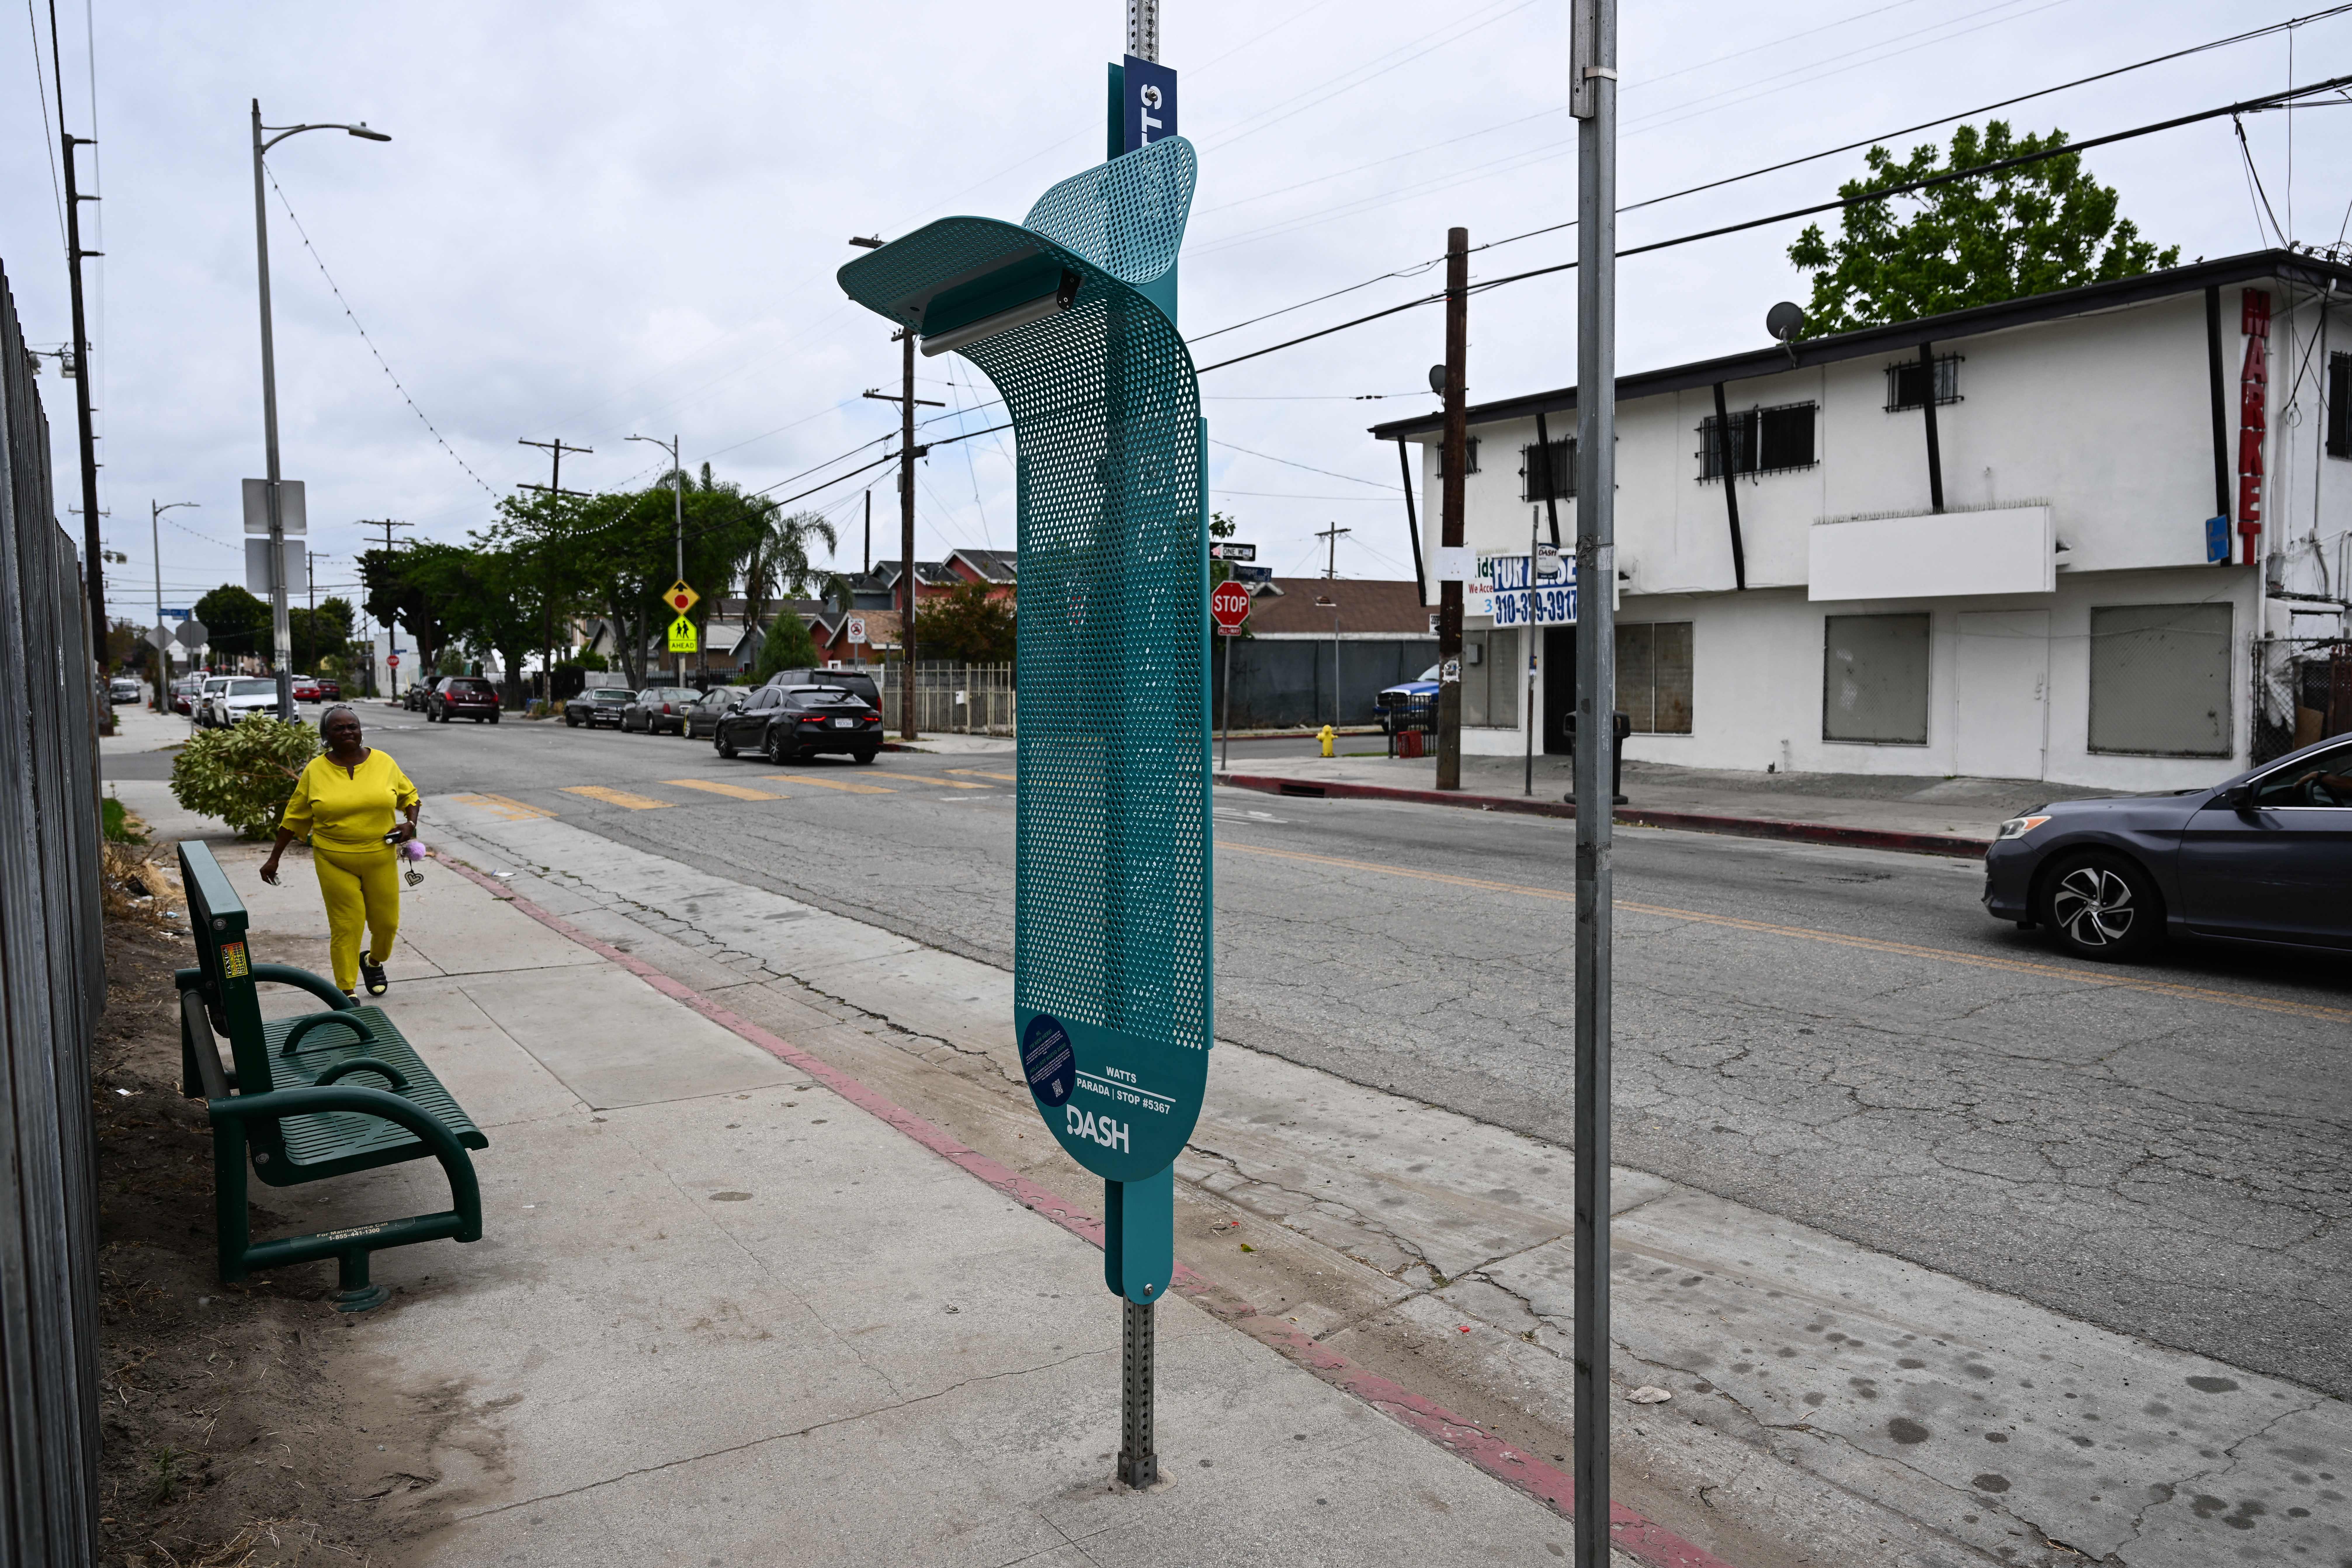 A pedestrian walks past La Sombrita, a prototype bus stop structure to provide shade during the day and solar-powered lighting at night installed by the Los Angeles Department of Transportation (LADOT) as a grant-funded pilot project for bus transit patrons, stands in the Watts neighborhood of Los Angeles, California on May 25, 2023. (Photo by Patrick T. Fallon / AFP) (Photo by PATRICK T. FALLON/AFP via Getty Images)